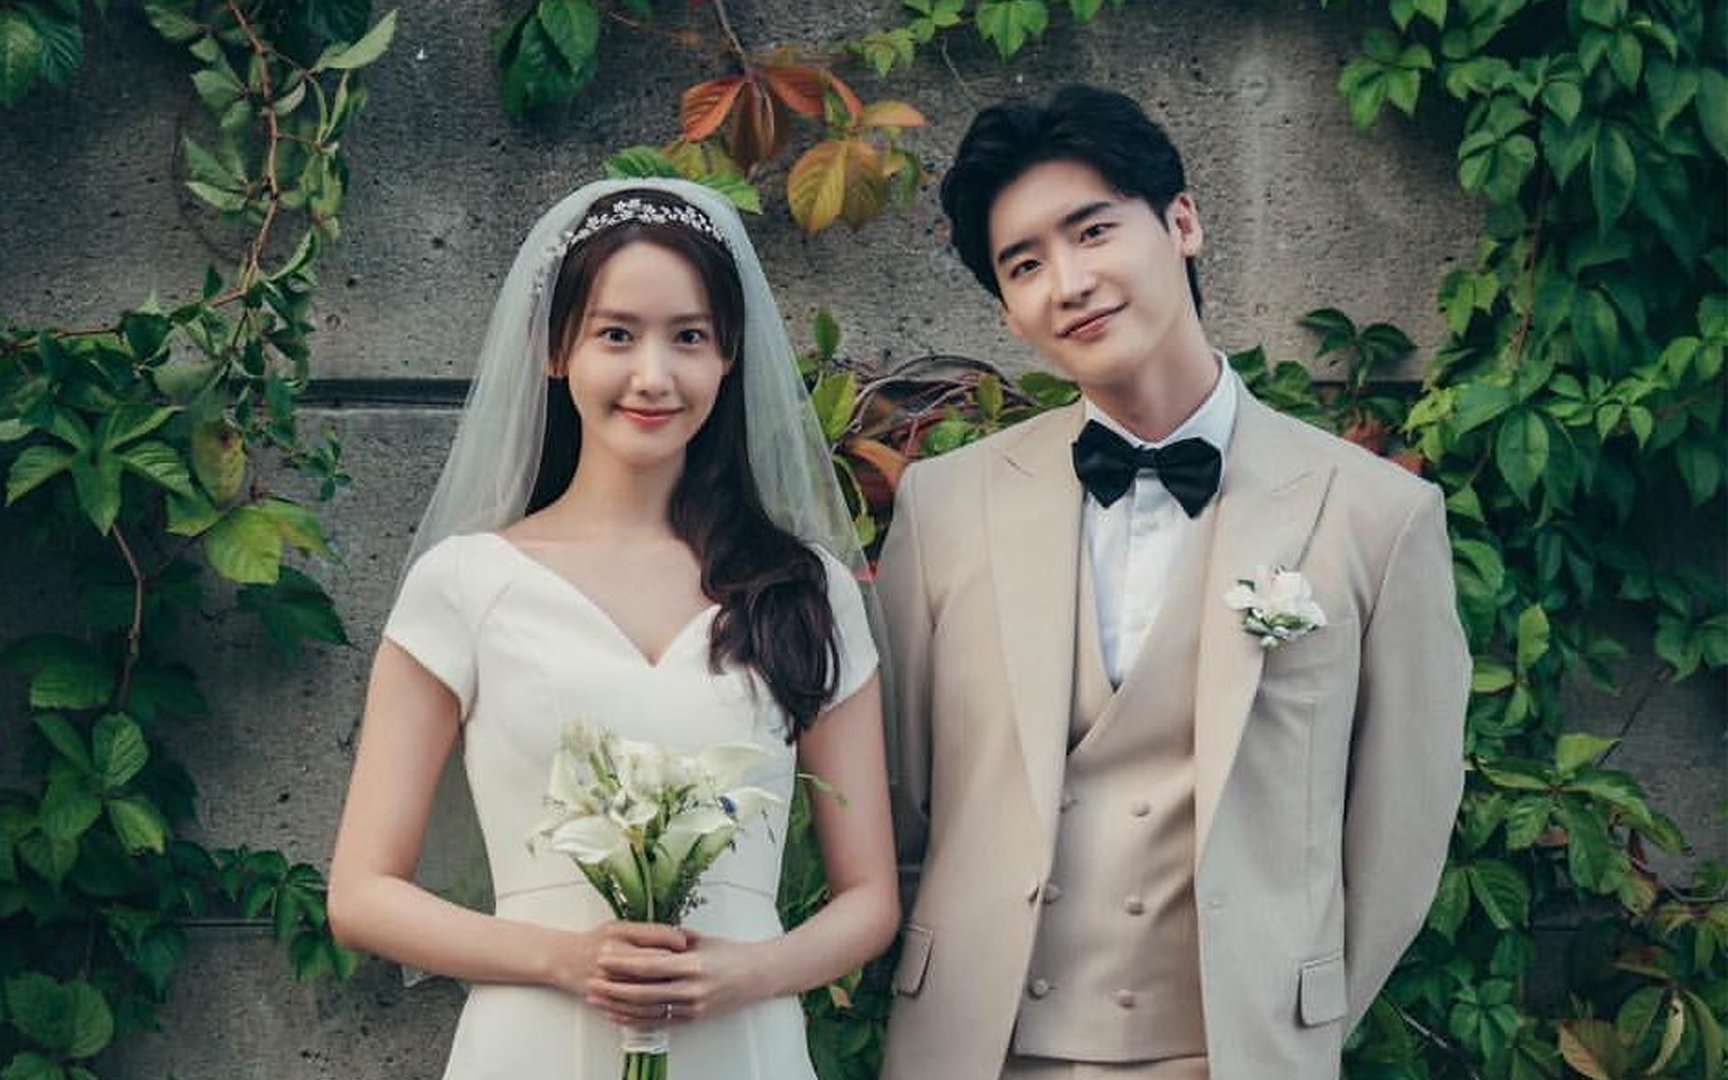 Lovely wedding photos of YoonA and Lee Jong Suk from 'Big Mouth' revealed |  allkpop